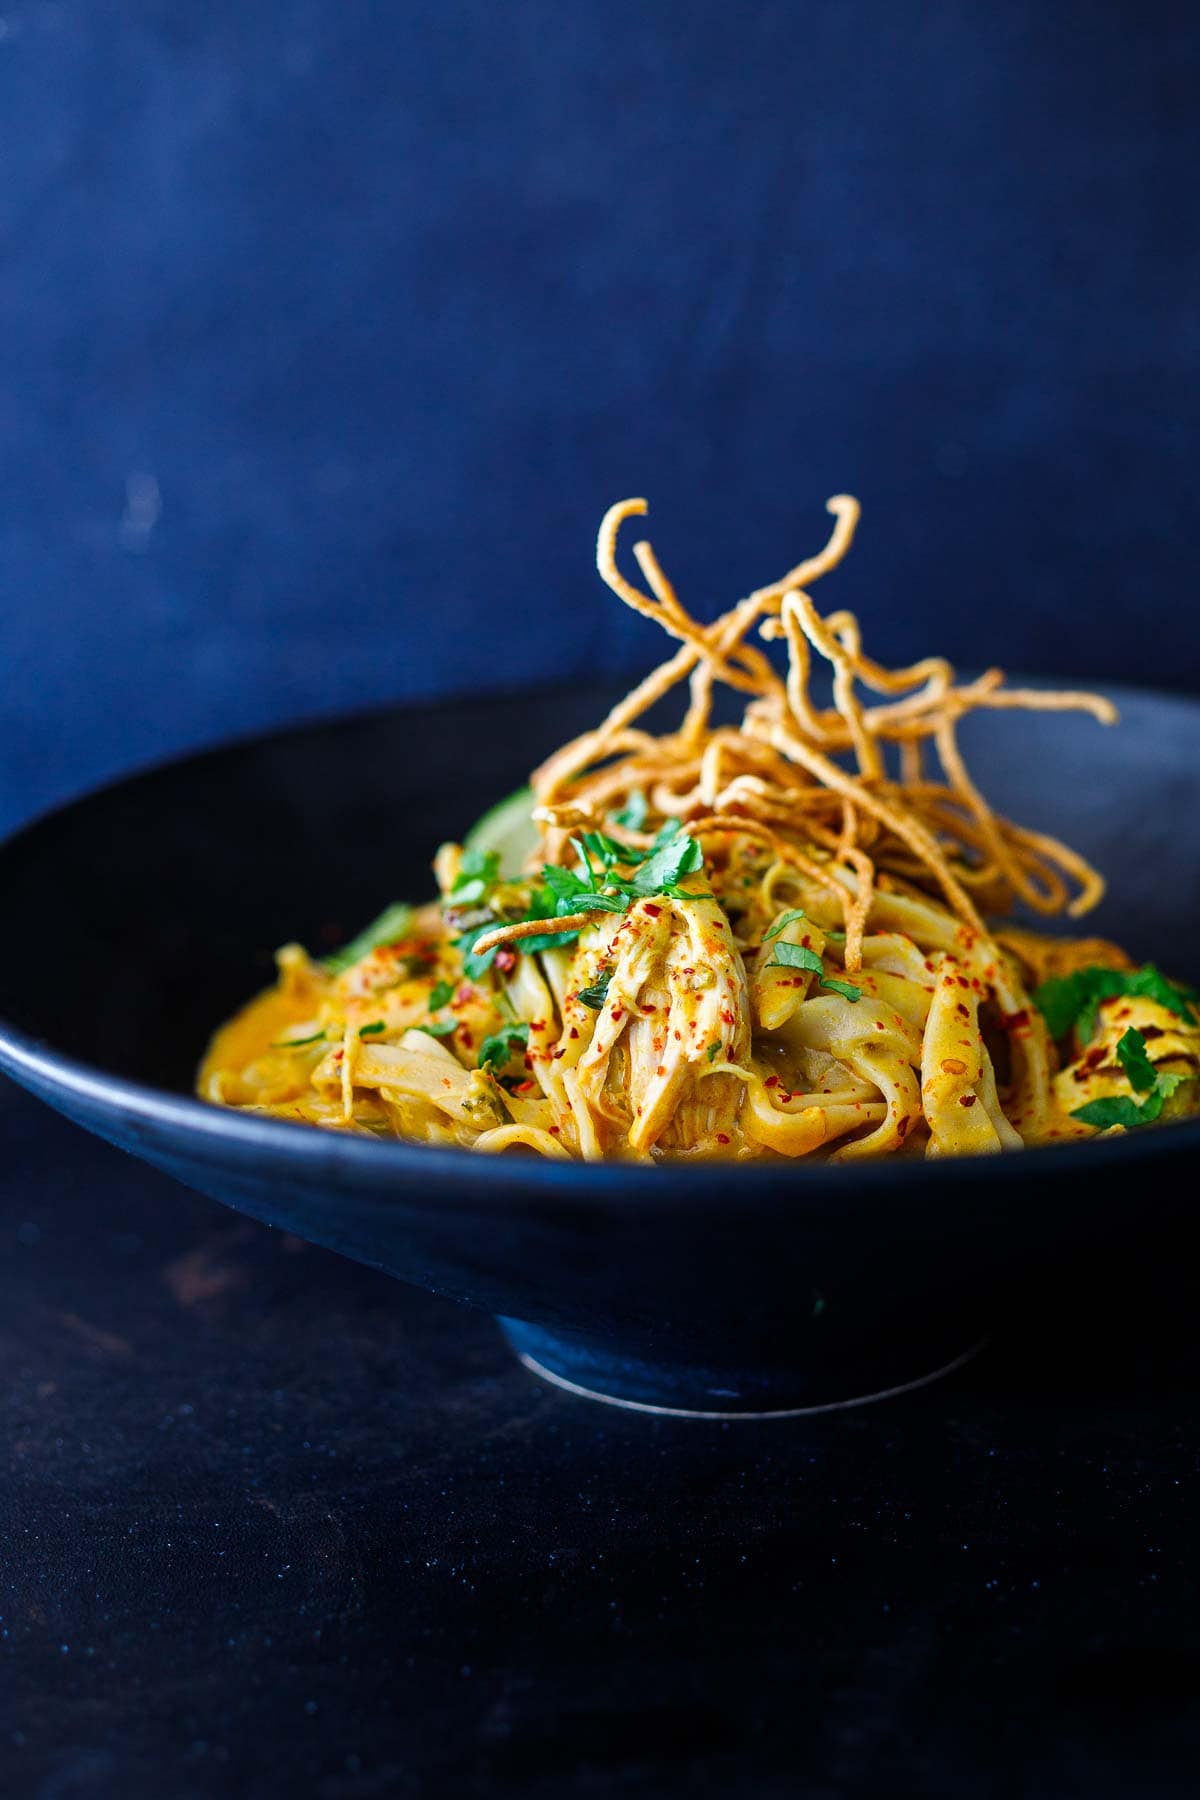 This Khao Soi recipe is rich, fragrant and delicious! It's a Coconut Curry Noodle Soup that hails from Northern Thailand and can be made with chicken, shrimp, tofu, or our crispy tofu.  Vegan-adaptable, GF.  Watch the Video!